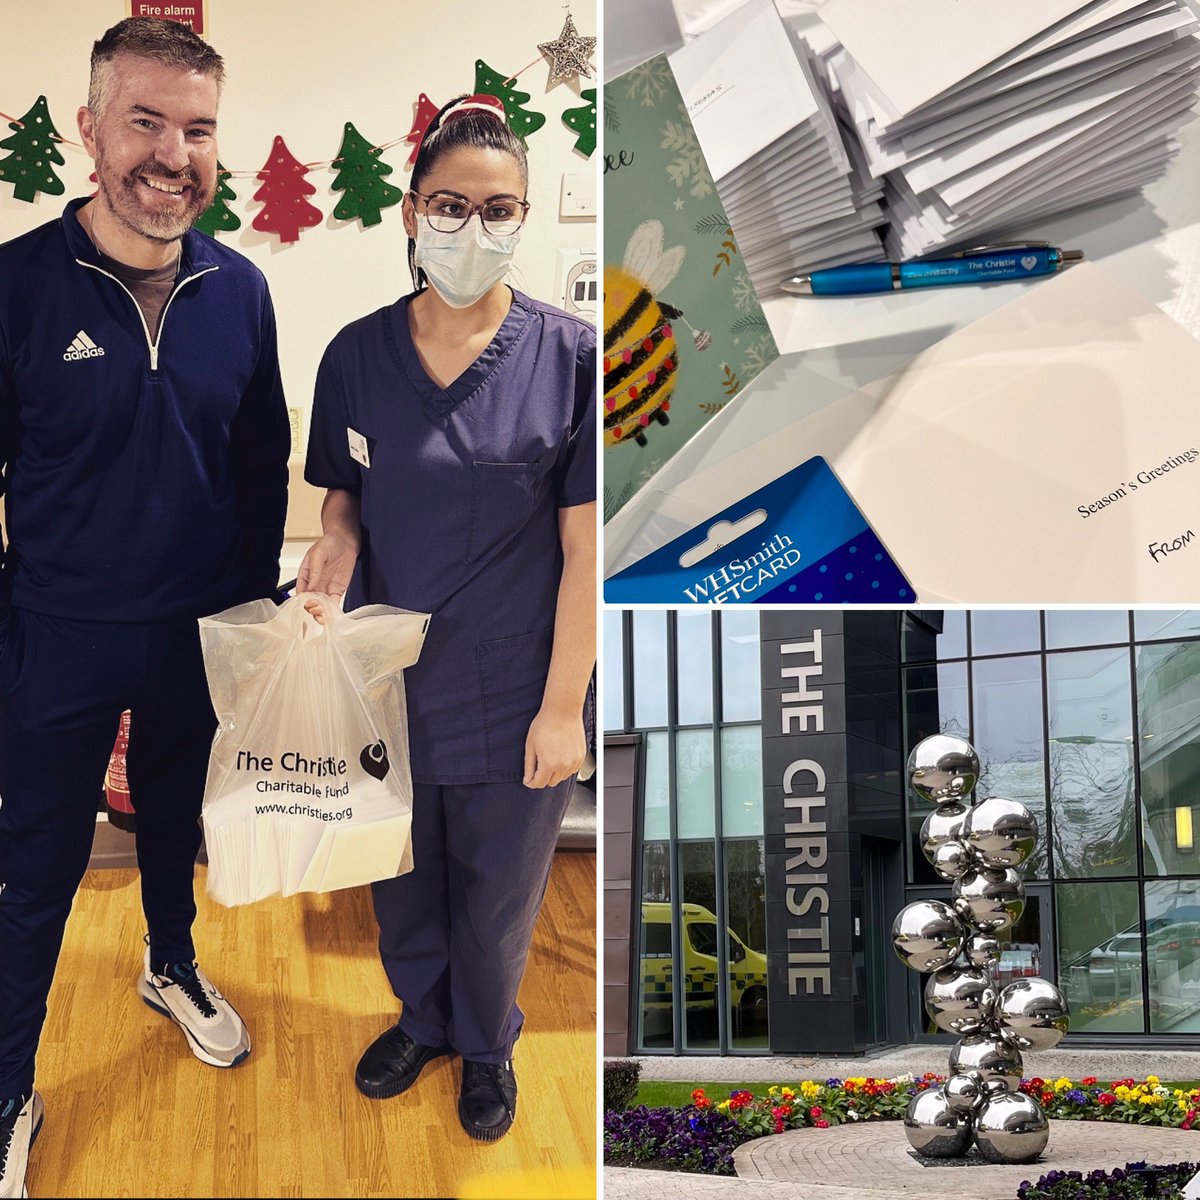 Before chemotherapy today, it gave me great delight to deliver 60 x Christmas Cards & Gift Vouchers to the Chemotherapy Unit at The Christie

Each card was given to a patient who is under going treatment today 💙 Hopefully it made a difference, and put smiles on faces. #TeamDDB